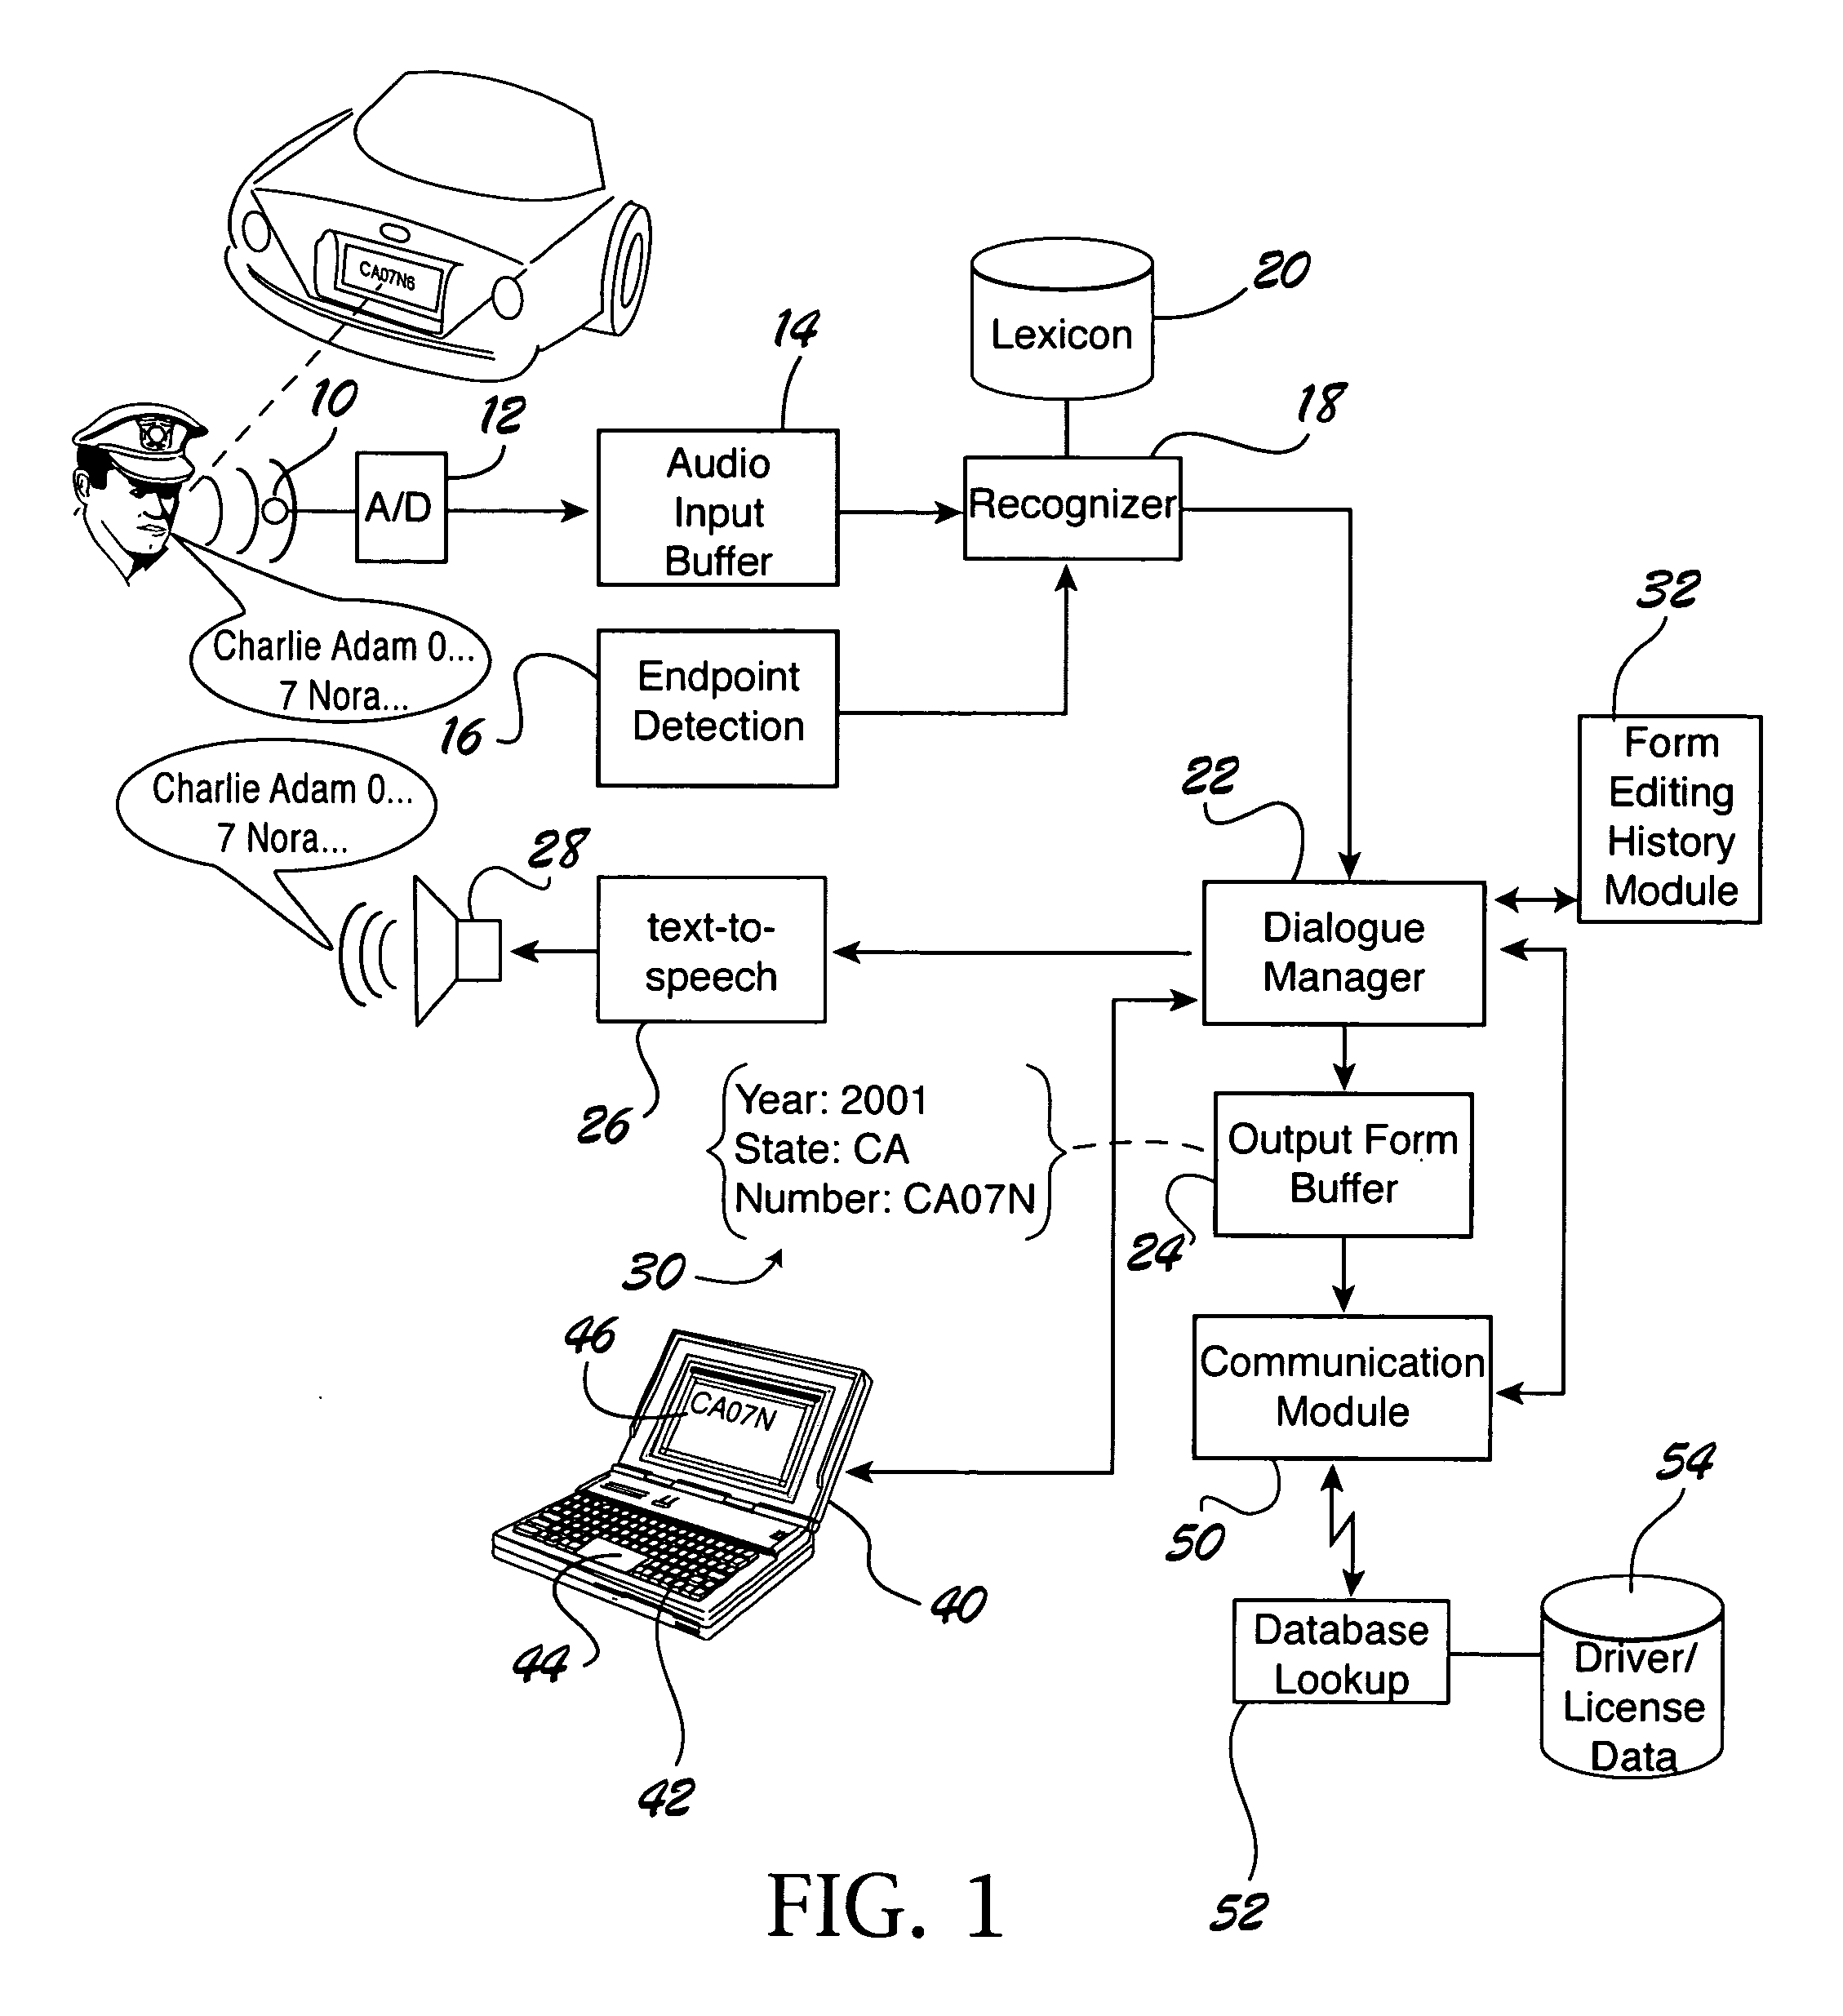 Method for efficient, safe and reliable data entry by voice under adverse conditions